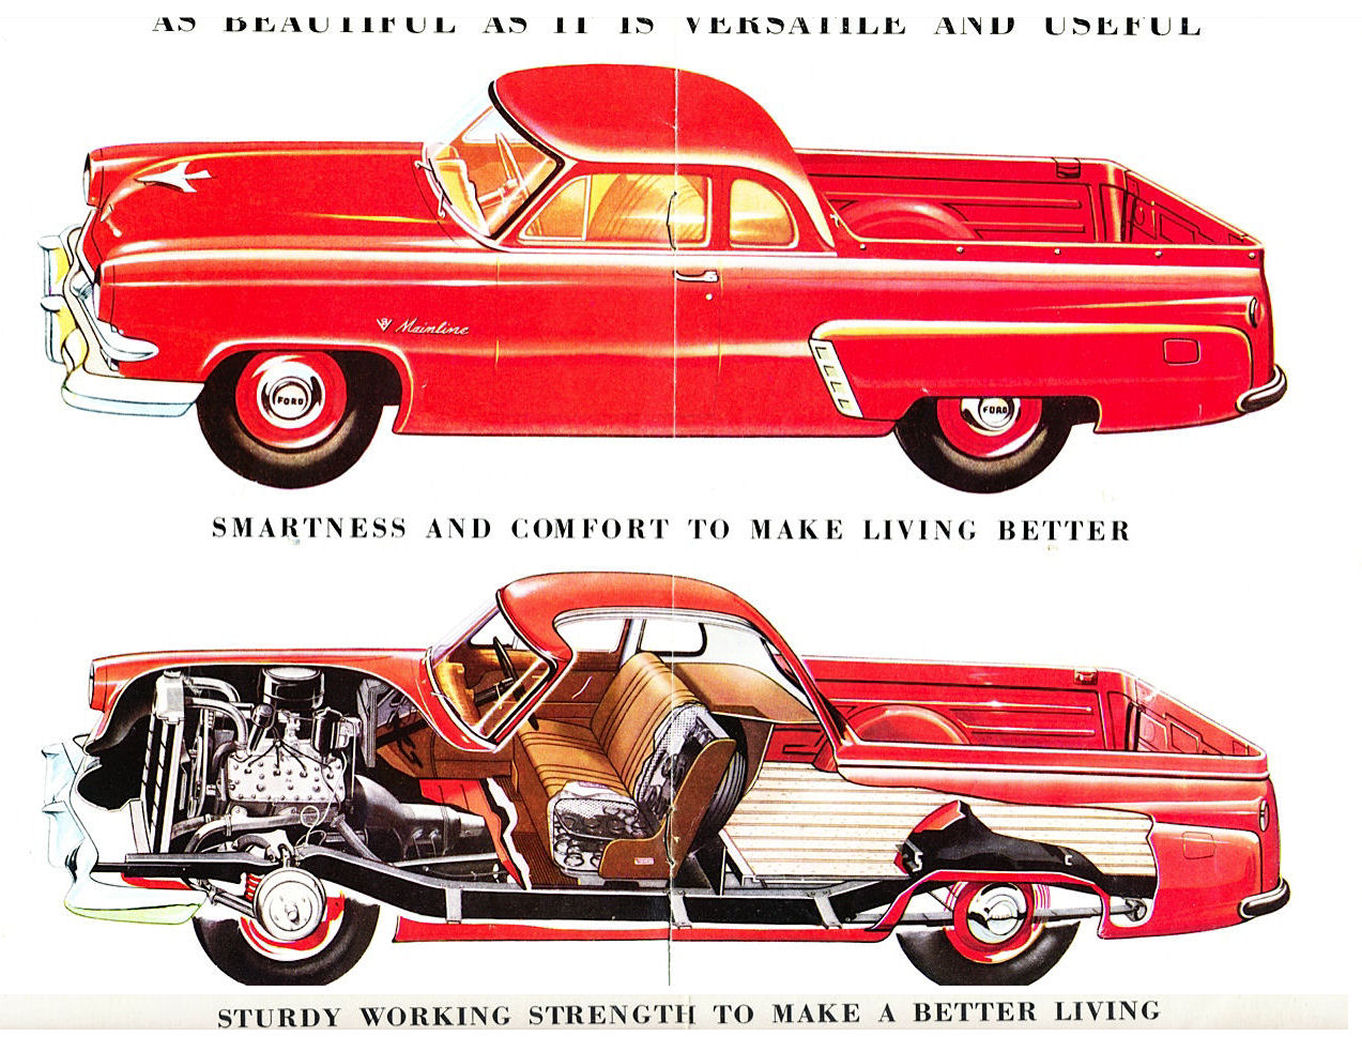 n_1953 Ford Mainline Coupe Utility-06-07.jpg